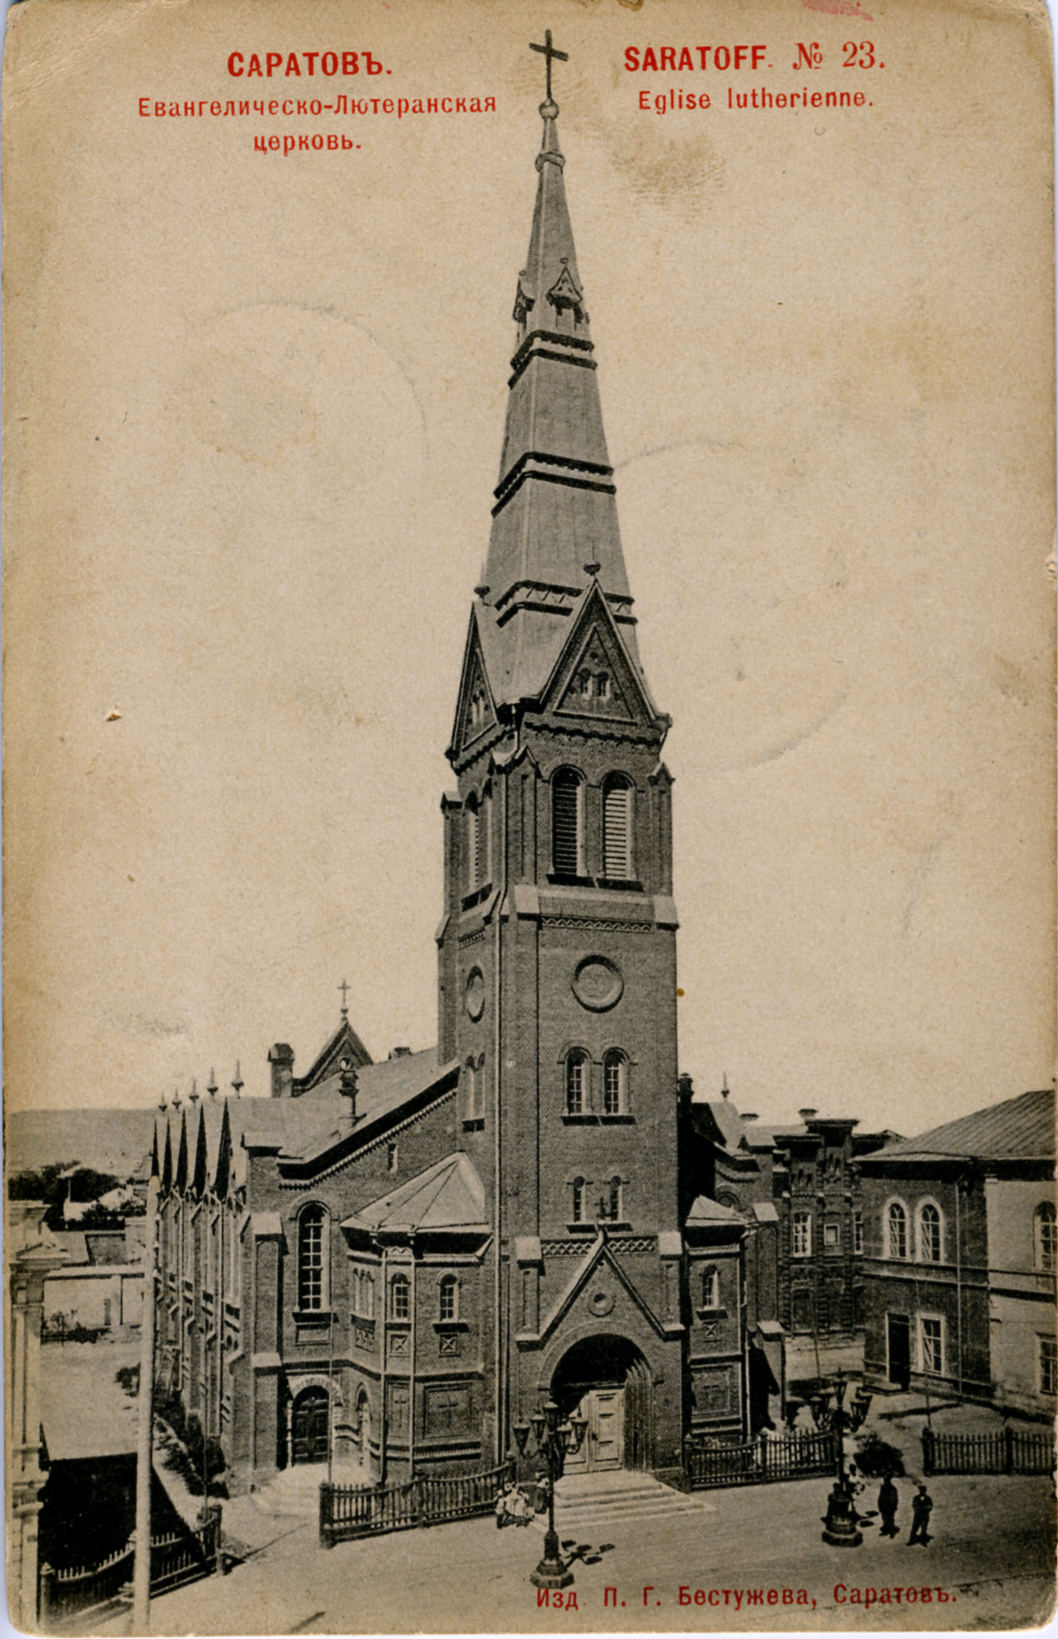 Postcard of the Lutheran Church in Saratov (1902). Courtesy of Steve Schreiber.